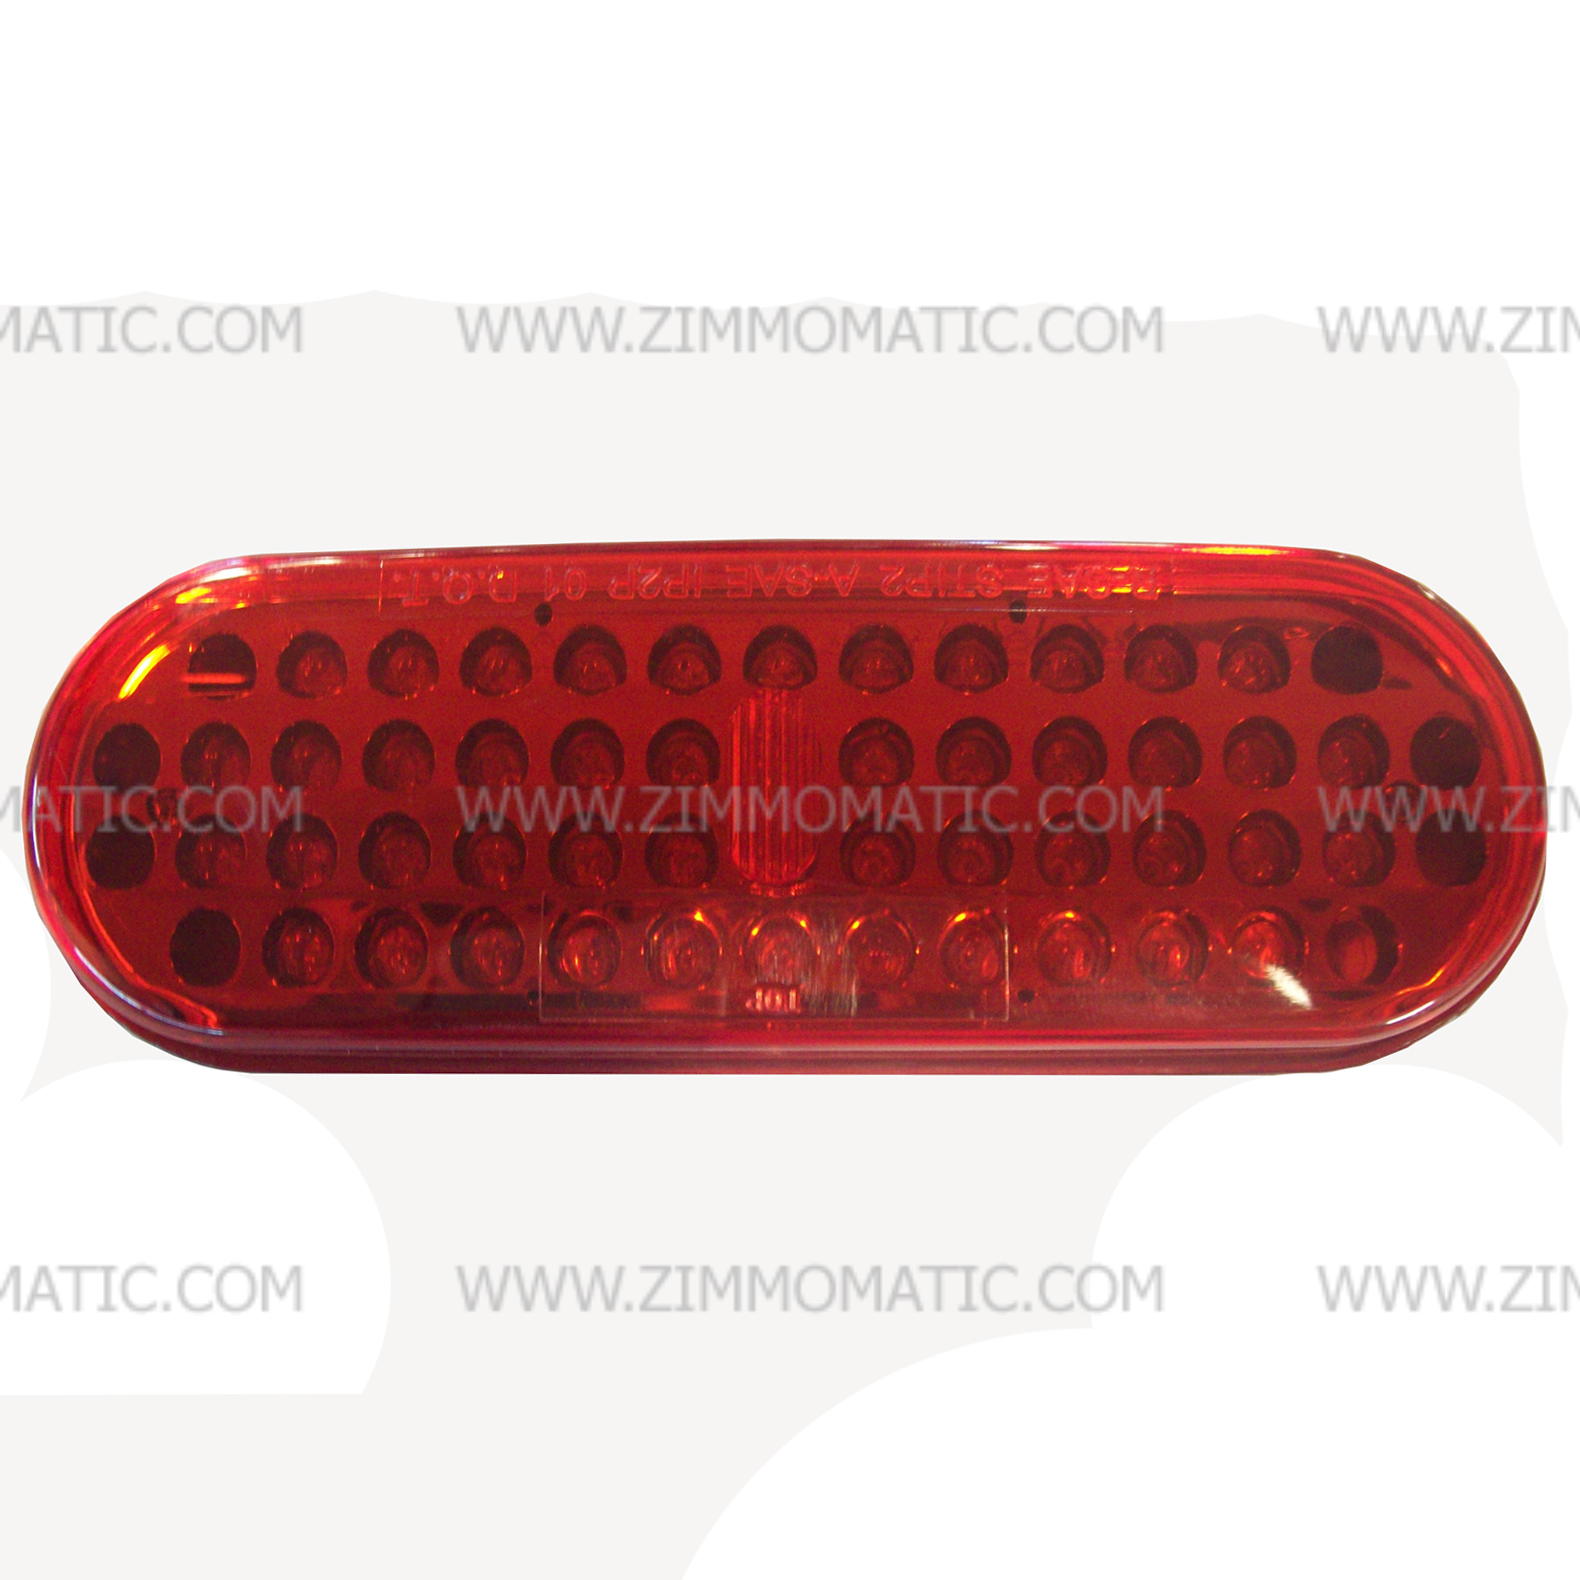 light, 2 x 6 inch oval, LED red, optronics